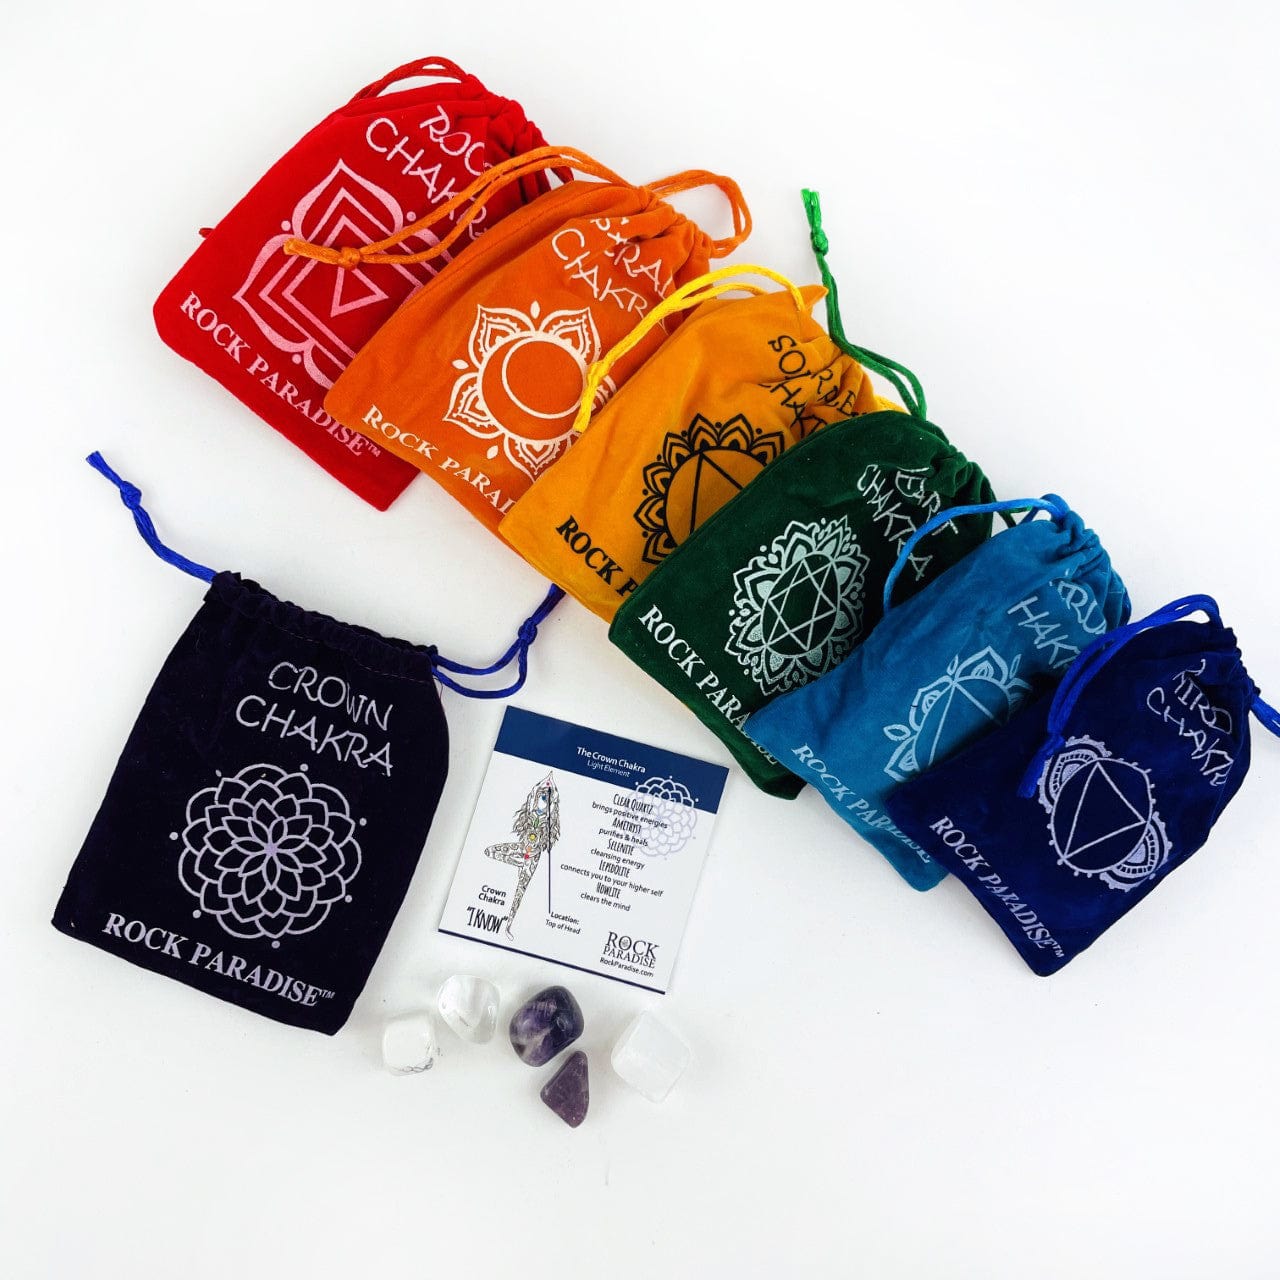 The Crown chakra pouch opened wshowing the information card and tumbled stones, and the other pouch sets behind